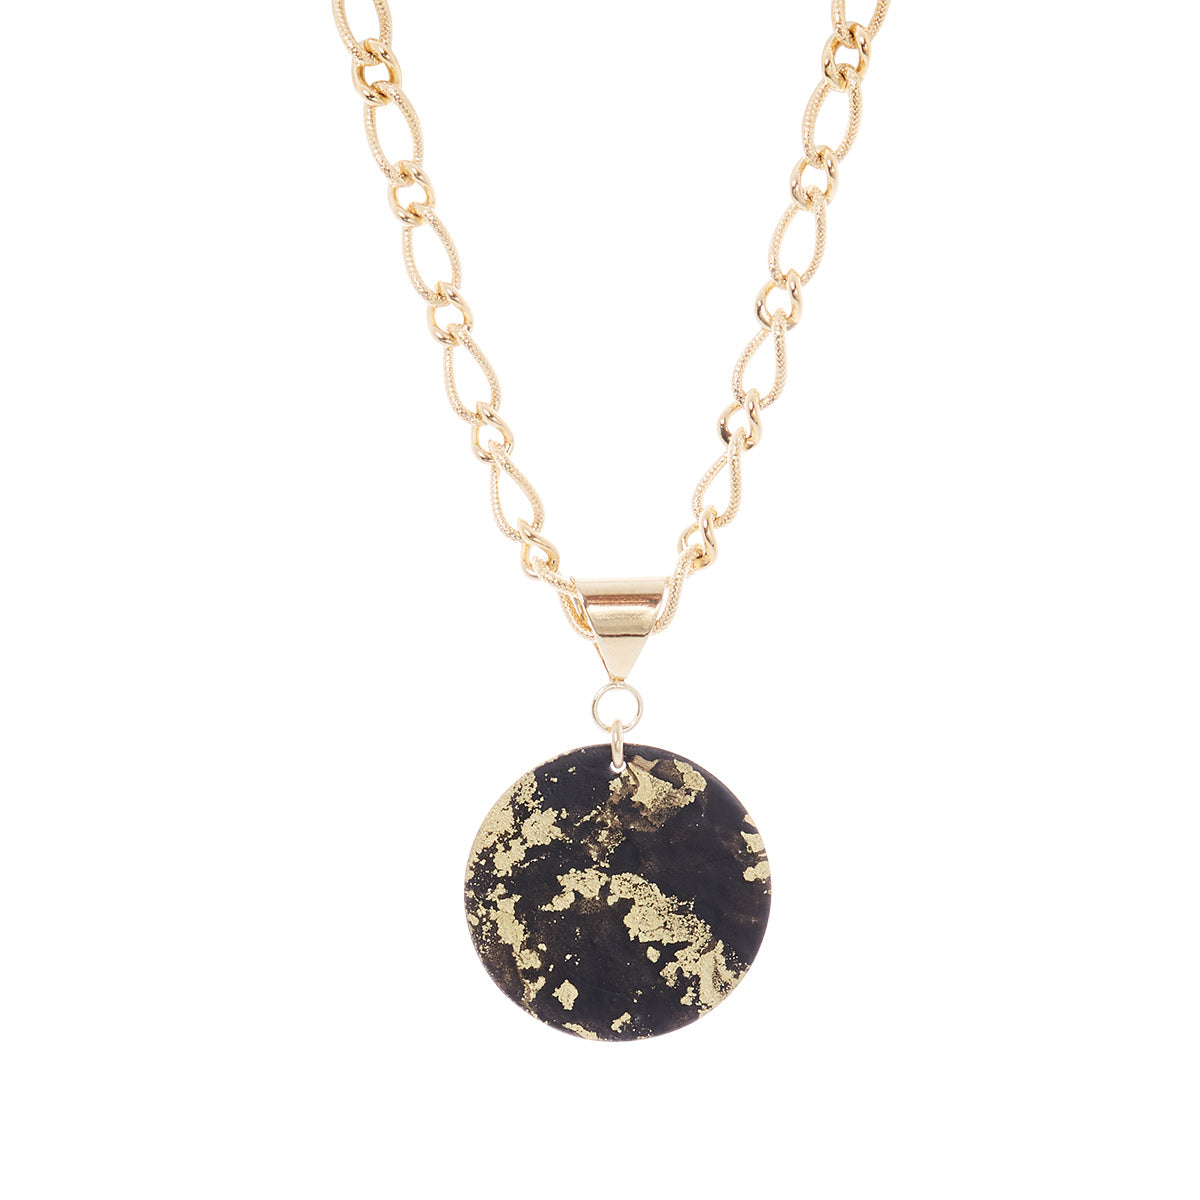 14K Gold Plated Bold Pendant Necklace - Available in More Colors